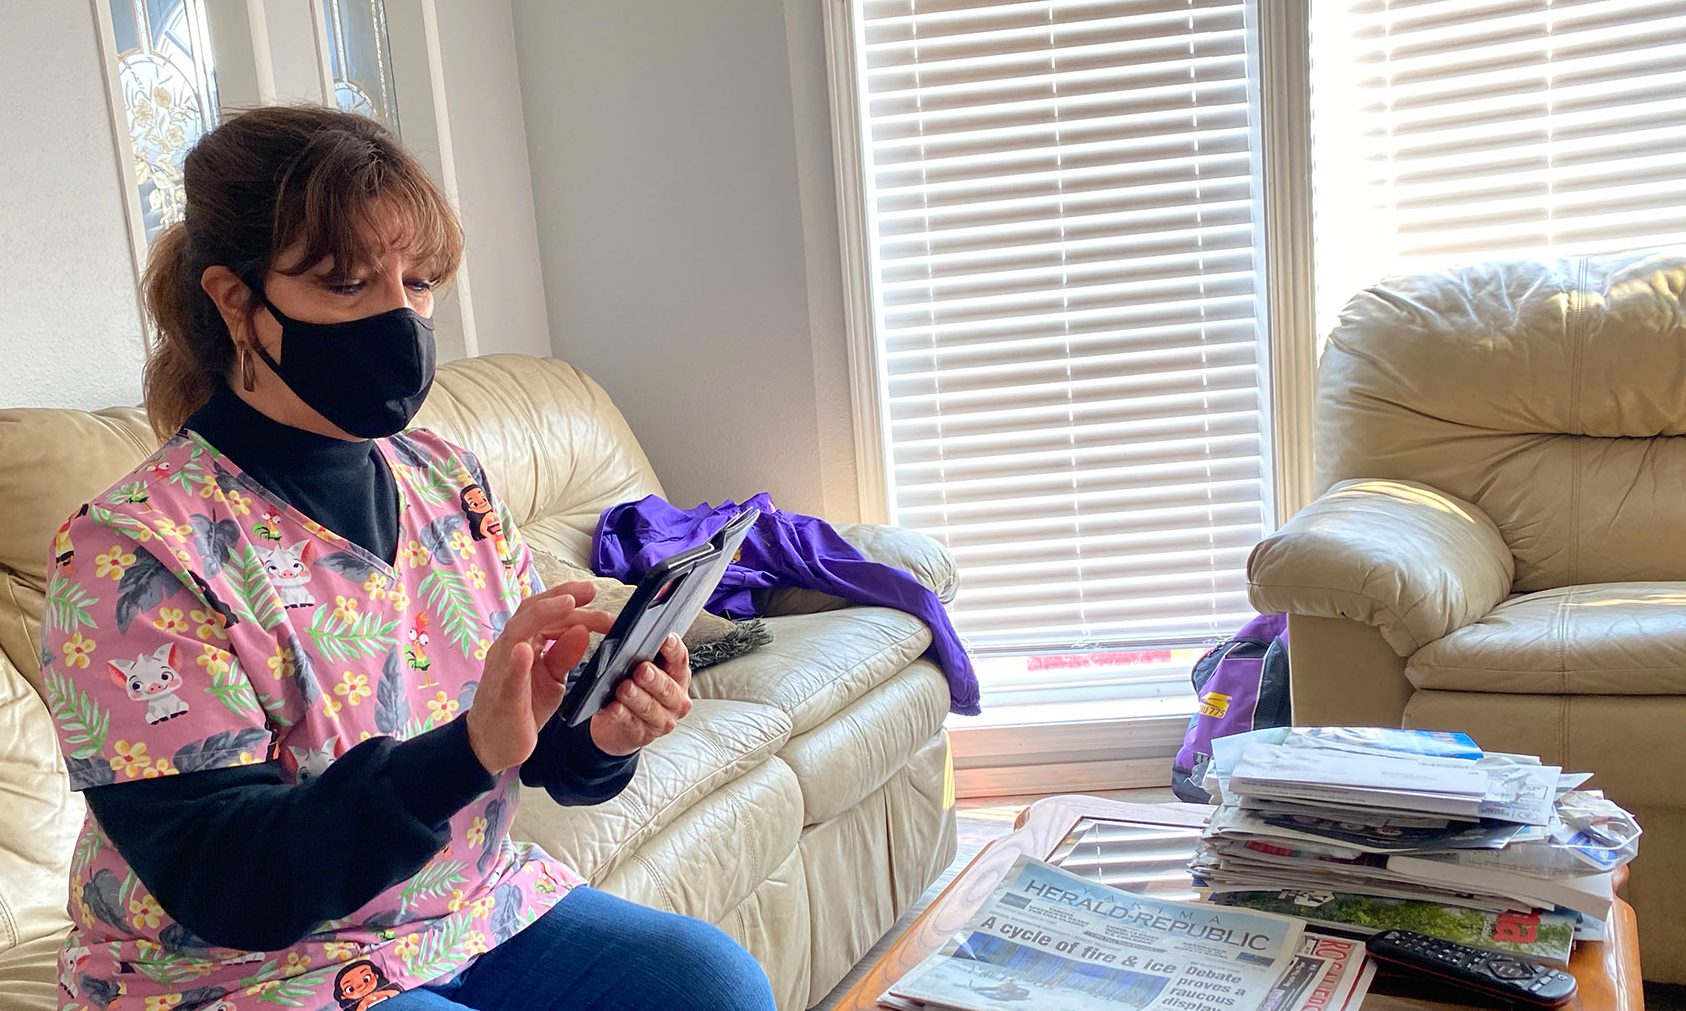 A caregiver wearing a mask looks at their phone